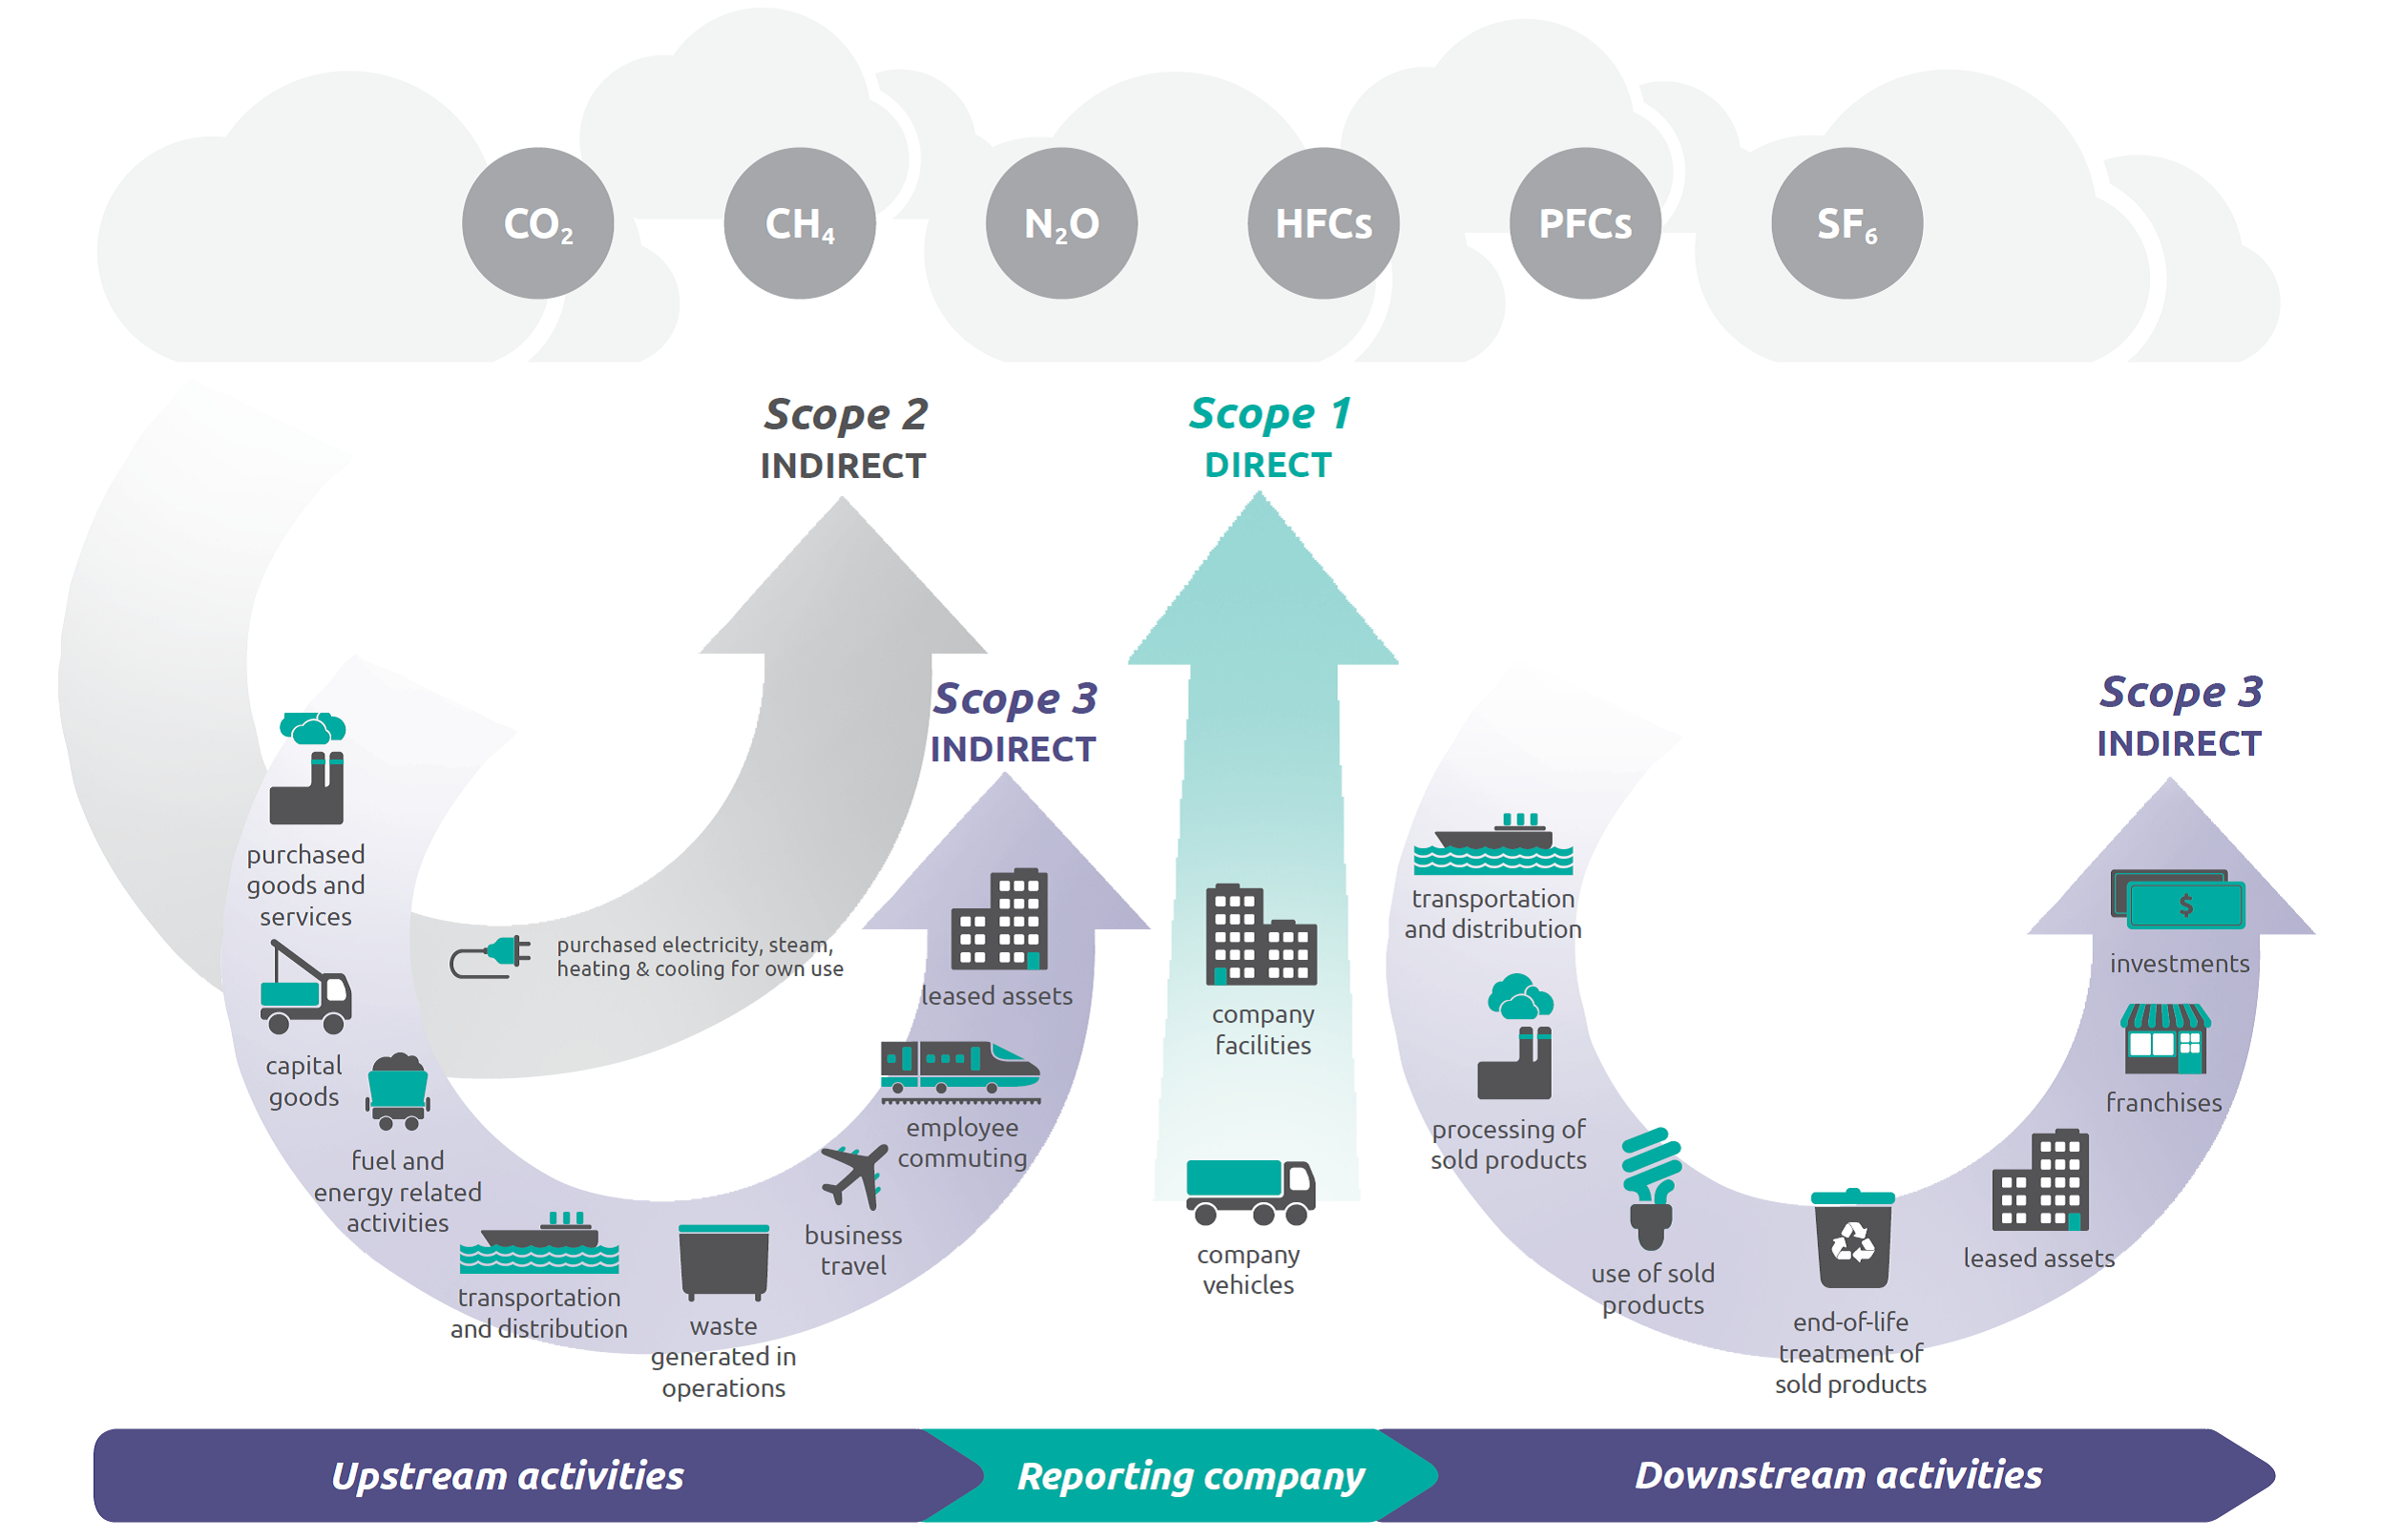 GHG Protocol scopes and emissions across the value chain